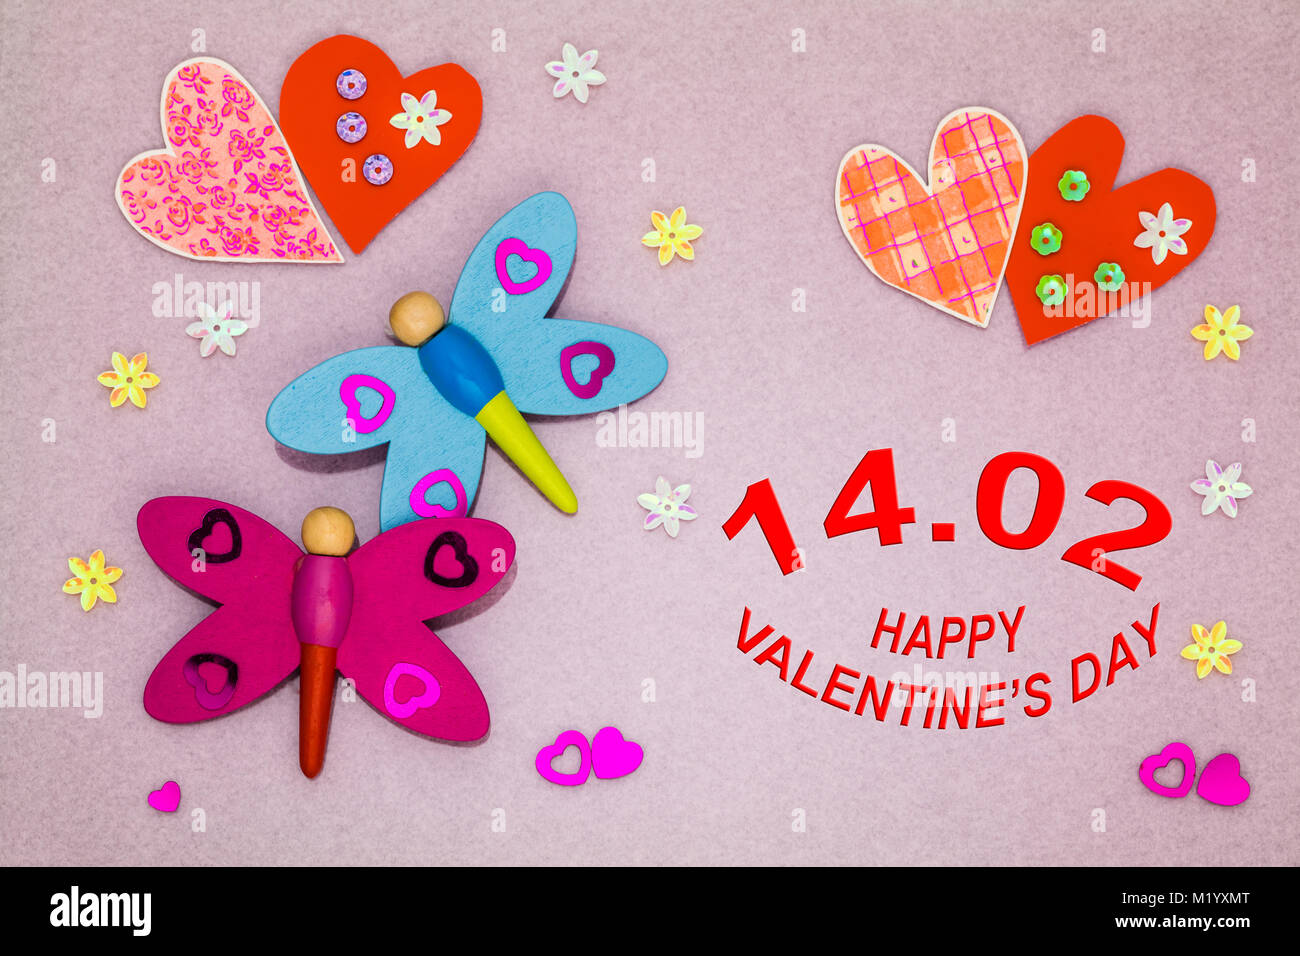 Valentines day card with hearts and dragonflies on colored background Stock Photo